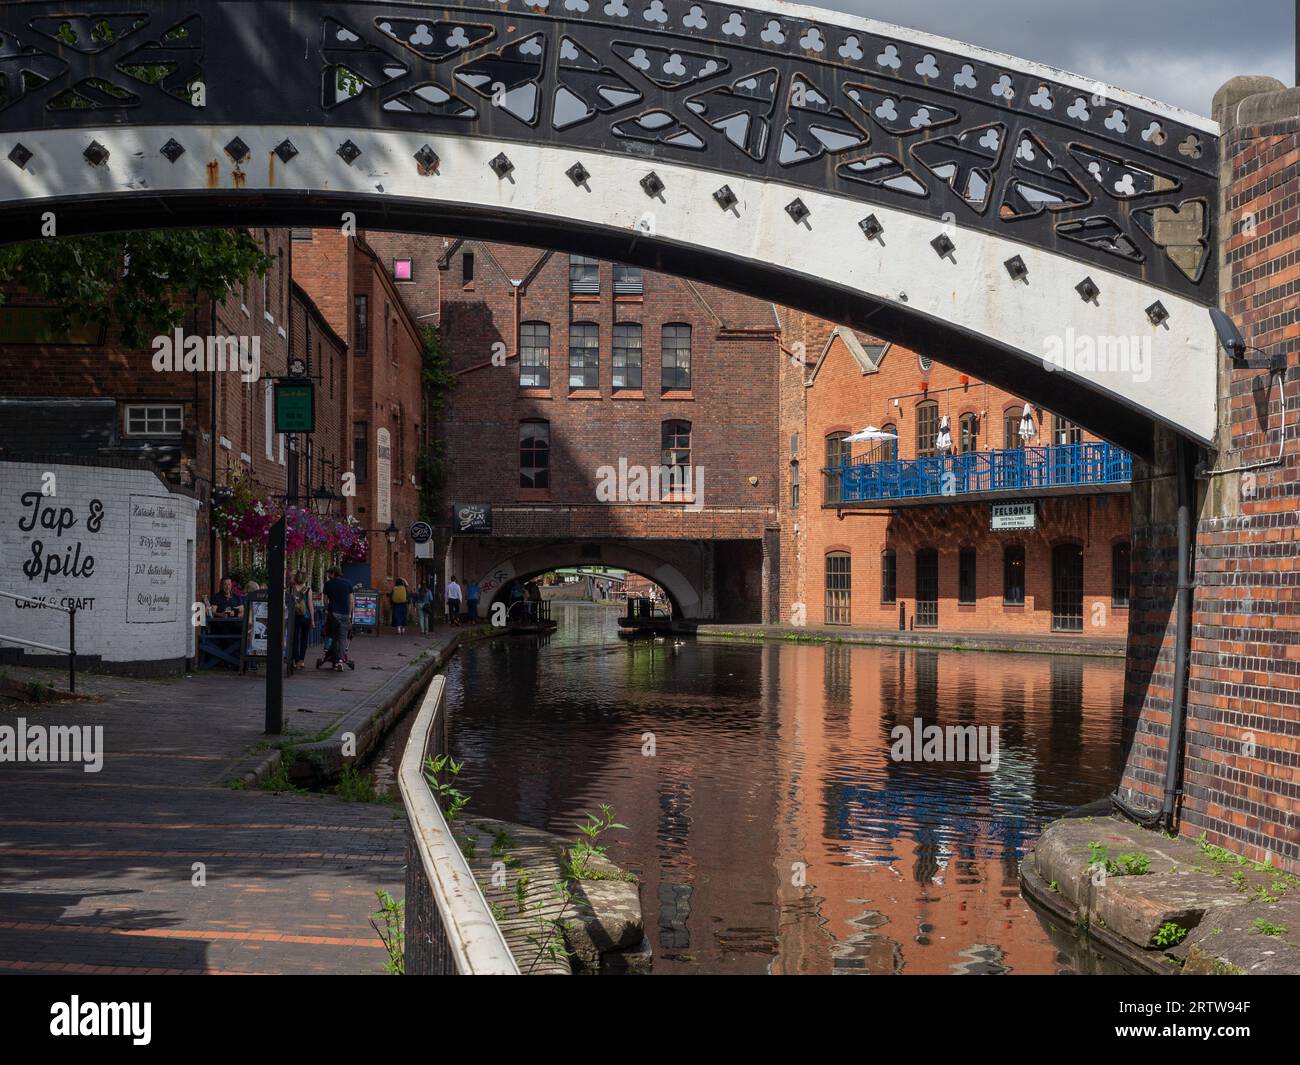 View of the canal at Gas Street Basin, Birmingham, UK; framed by an ornate metal footbridge Stock Photo